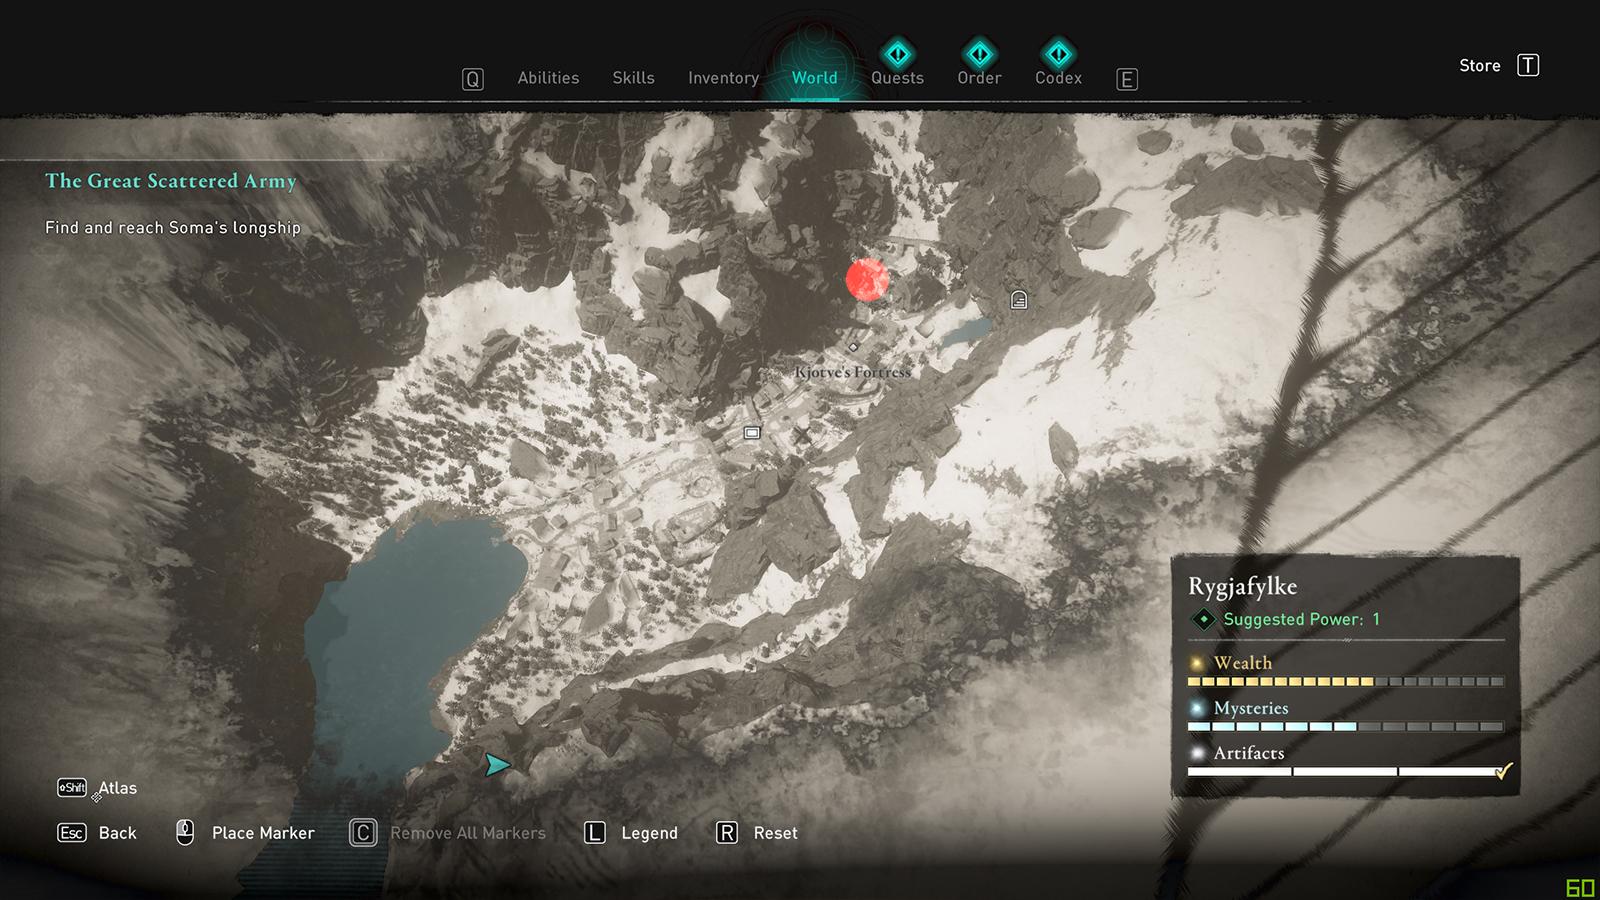 Map with a red blip showing the location of the Iron-Star weapon in Valhalla